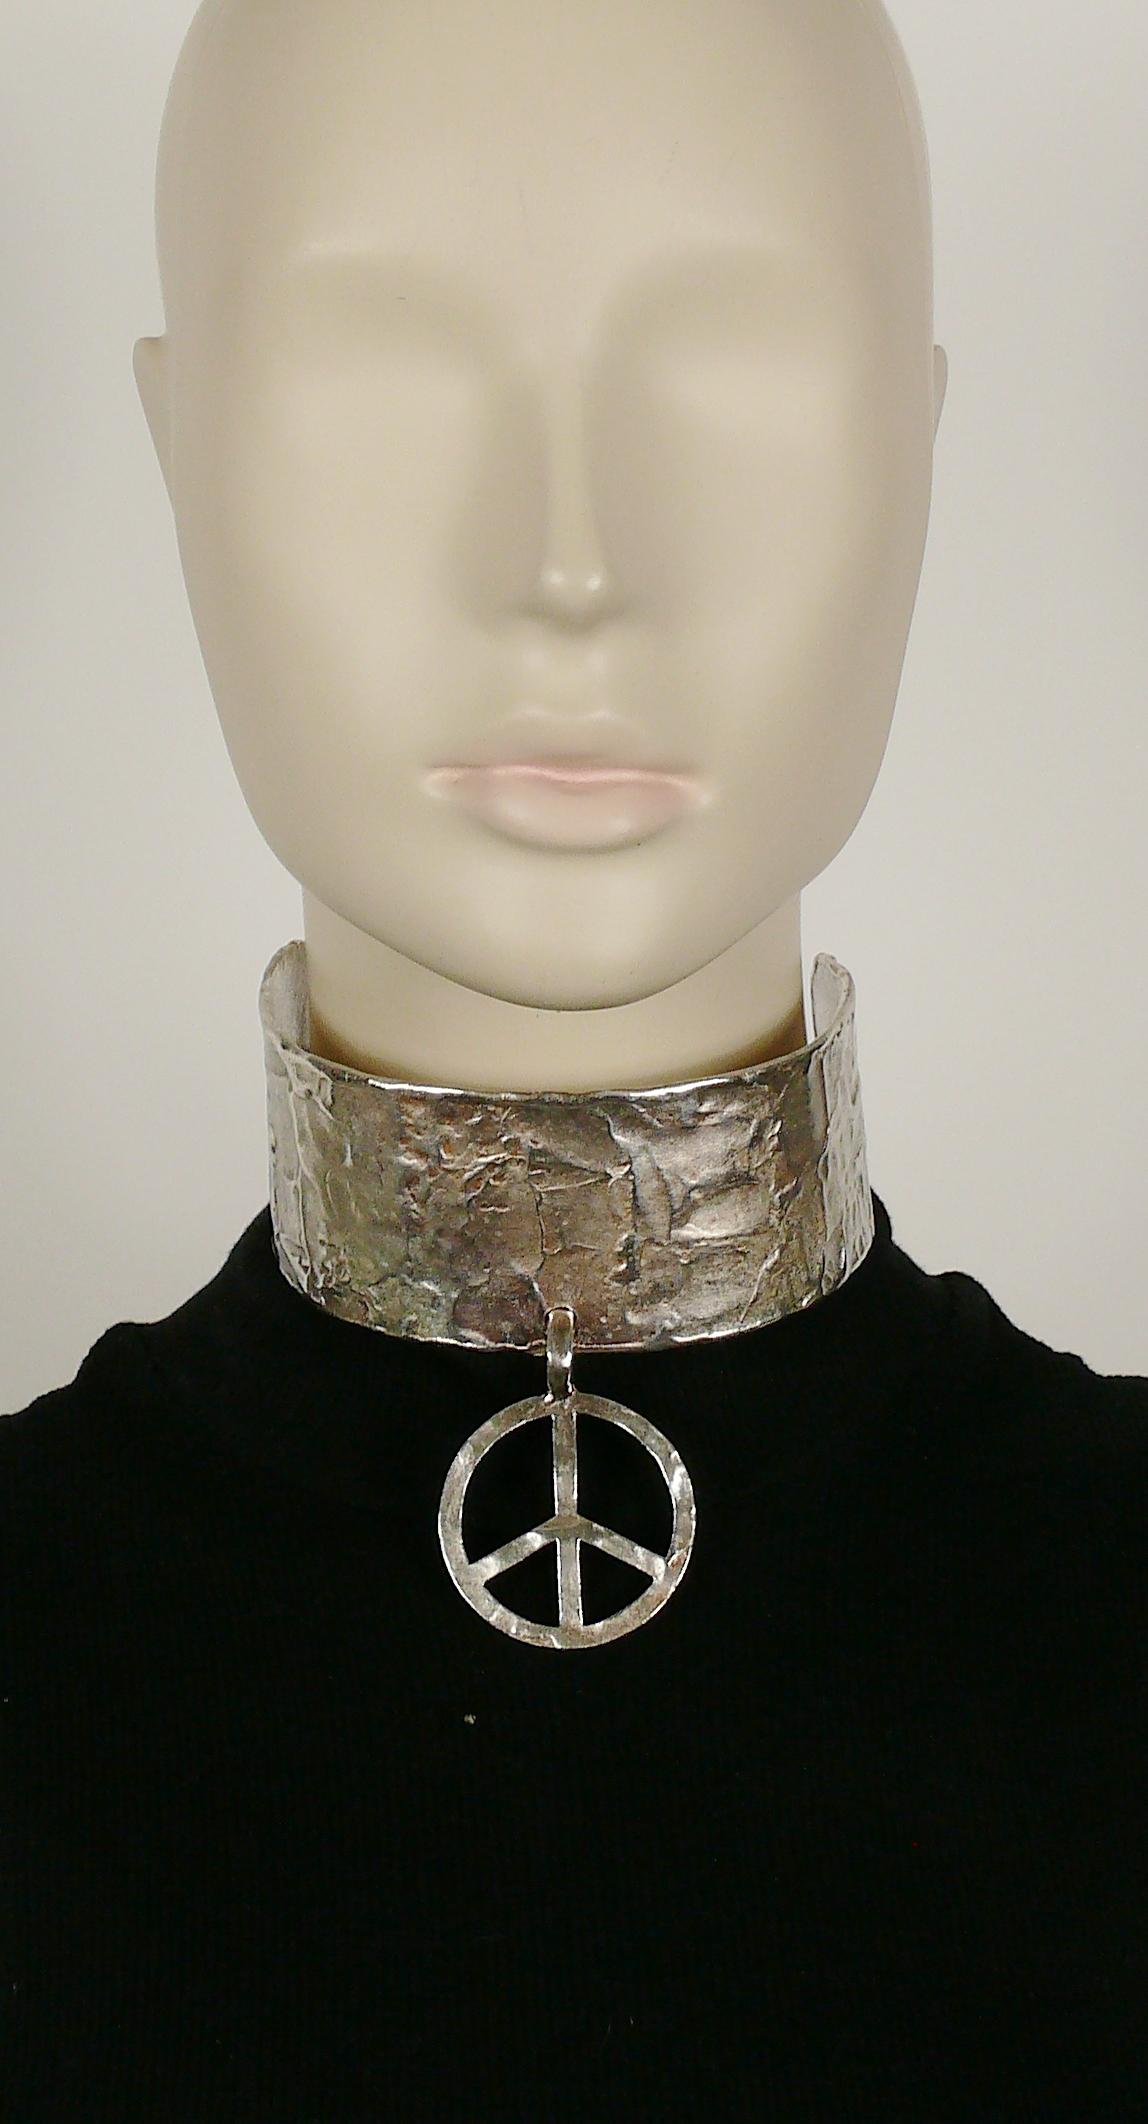 BICHE DE BERE vintage silver toned textured choker necklace featuring a peace sign pendant.

Adjustable hook clasp closure.

Limited Edition N° 14/53.
Embossed BICHE DE BERE Paris.

Indicative measurements : inner width approx. 10.5 cm (4.13 inches)